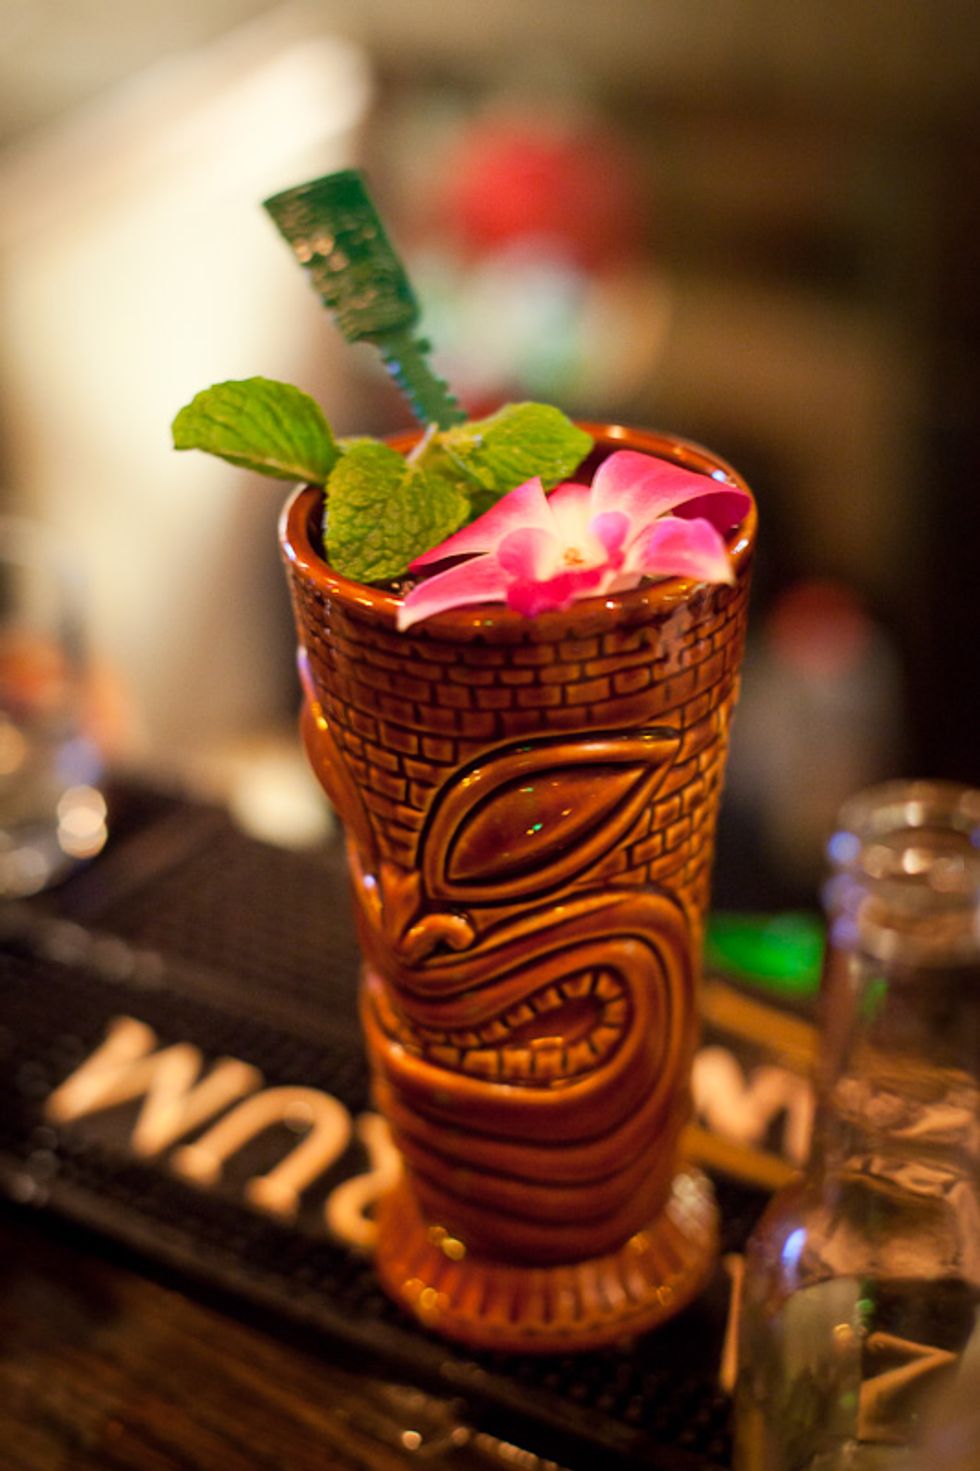 Channel Your Inner Beachcomber with a Taste of Tiki